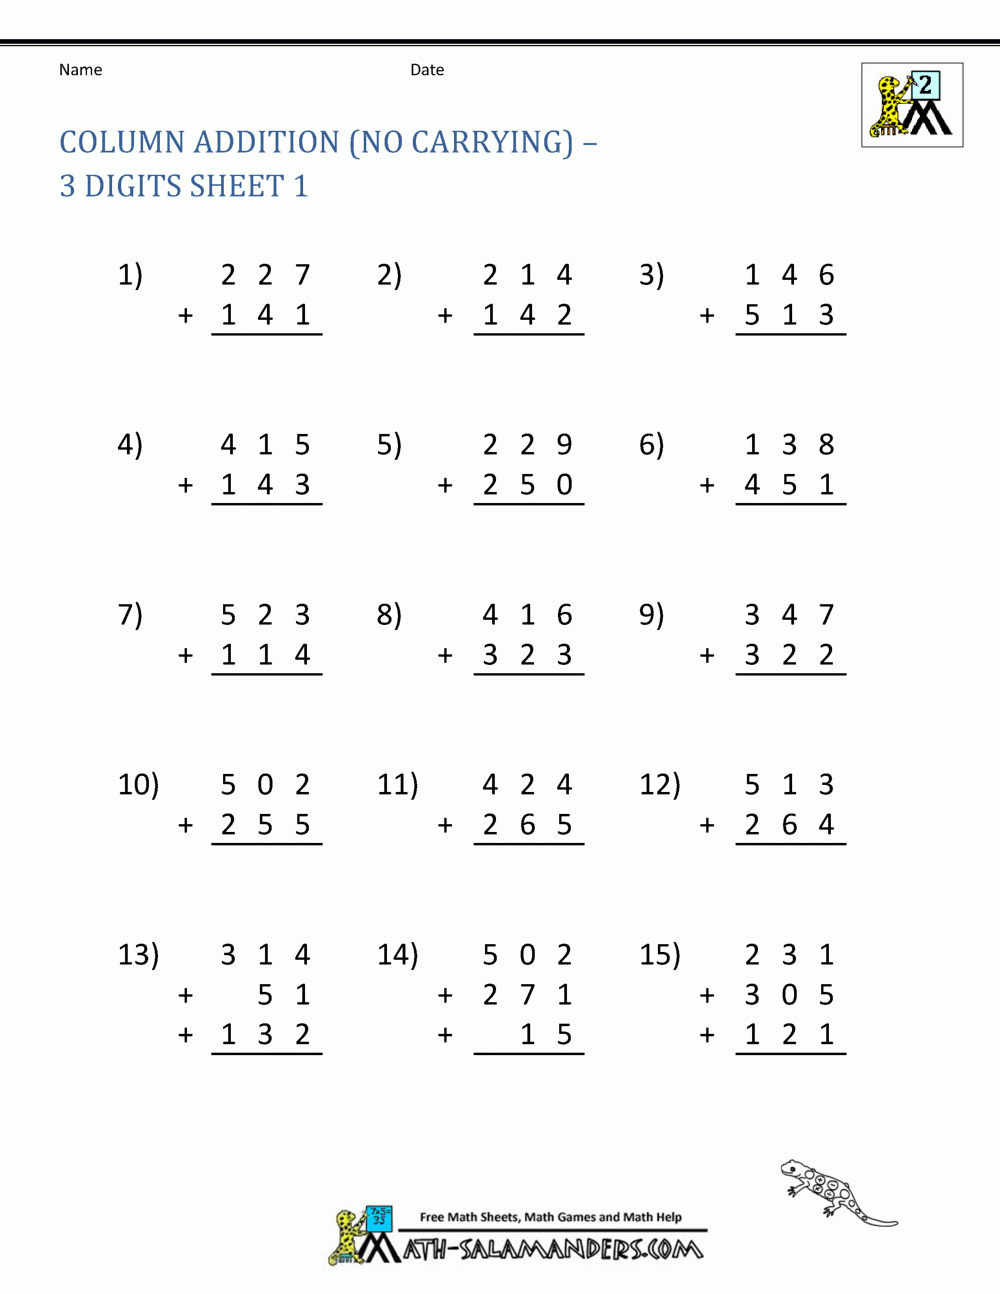 3 Digit Addition Worksheets pertaining to Multiplication Worksheets No Carrying